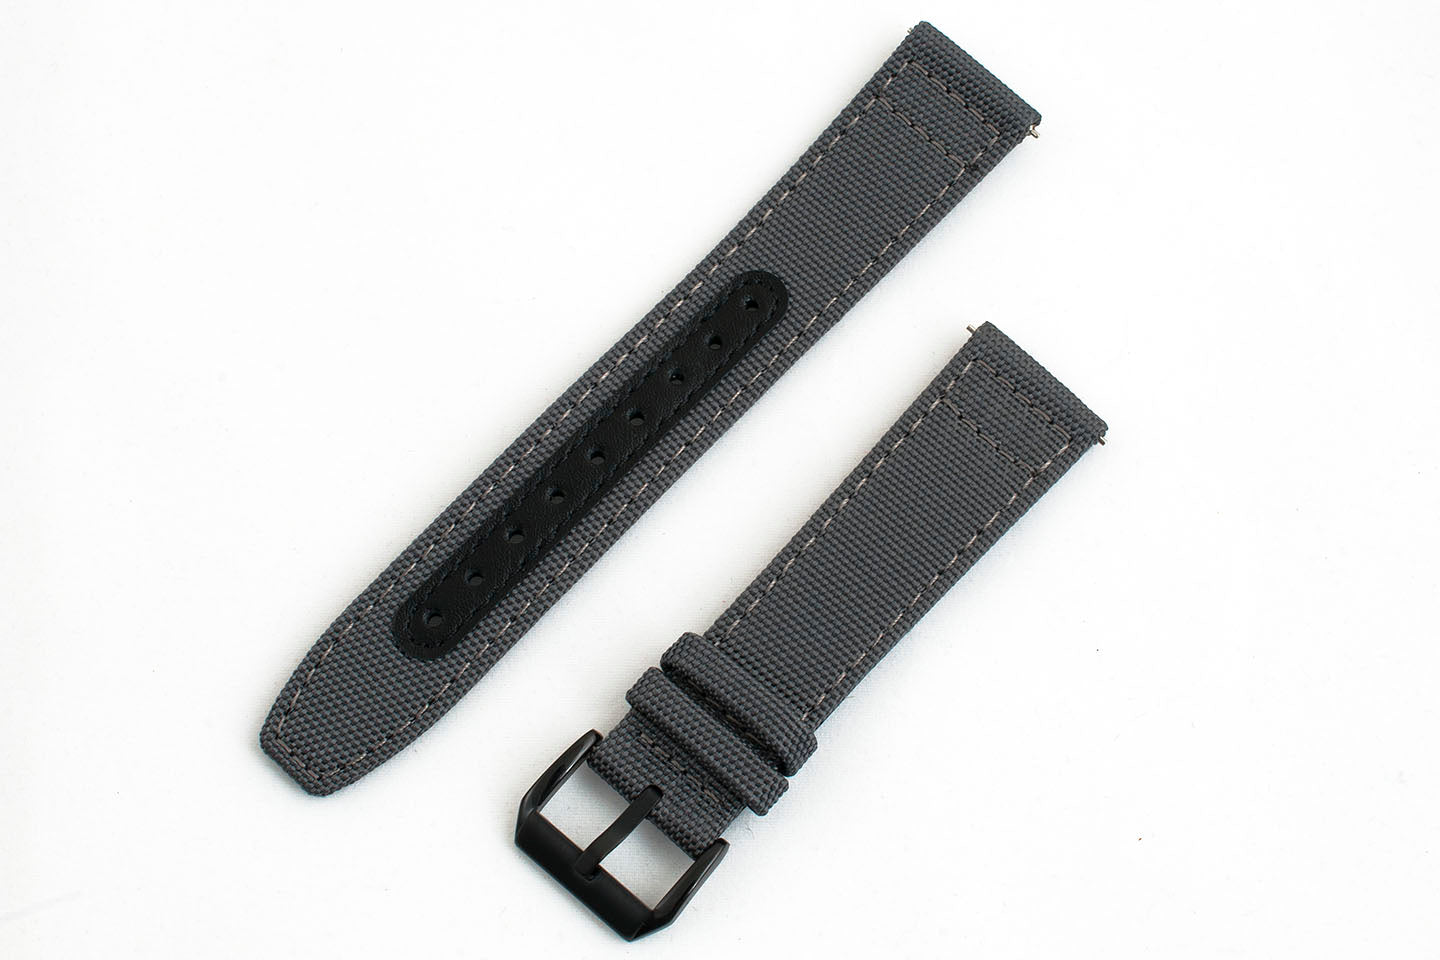 Premium Sailcloth quick release watch strap band replacement 19mm, 20mm, 21mm, 22mm gray grey with black buckle pvd